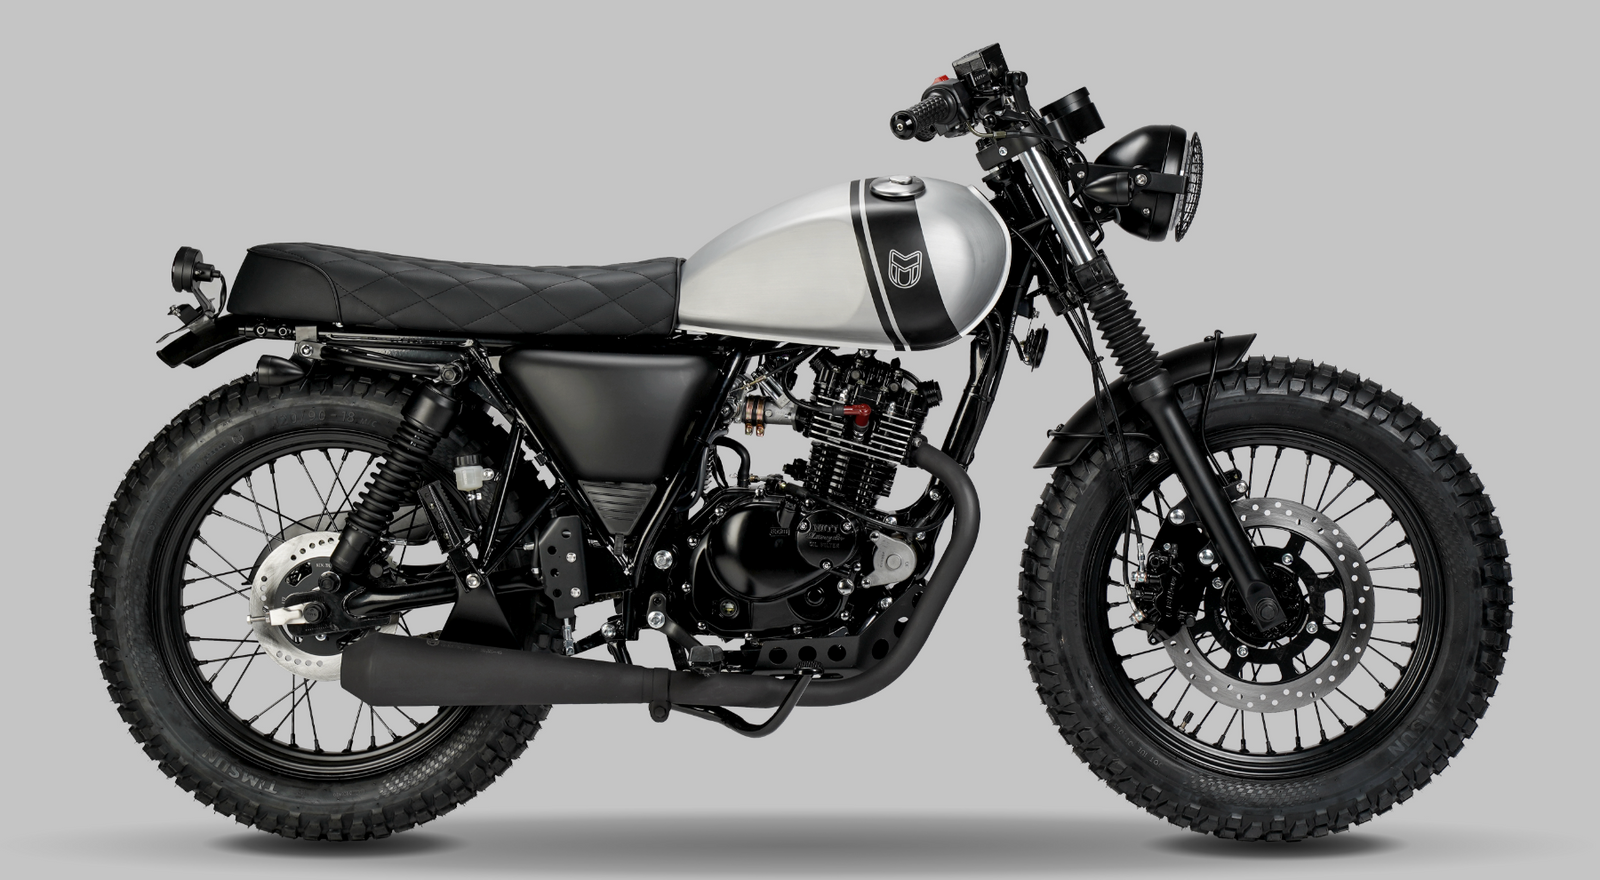 125cc & 250cc Motorcycles | Mutt Motorcycles